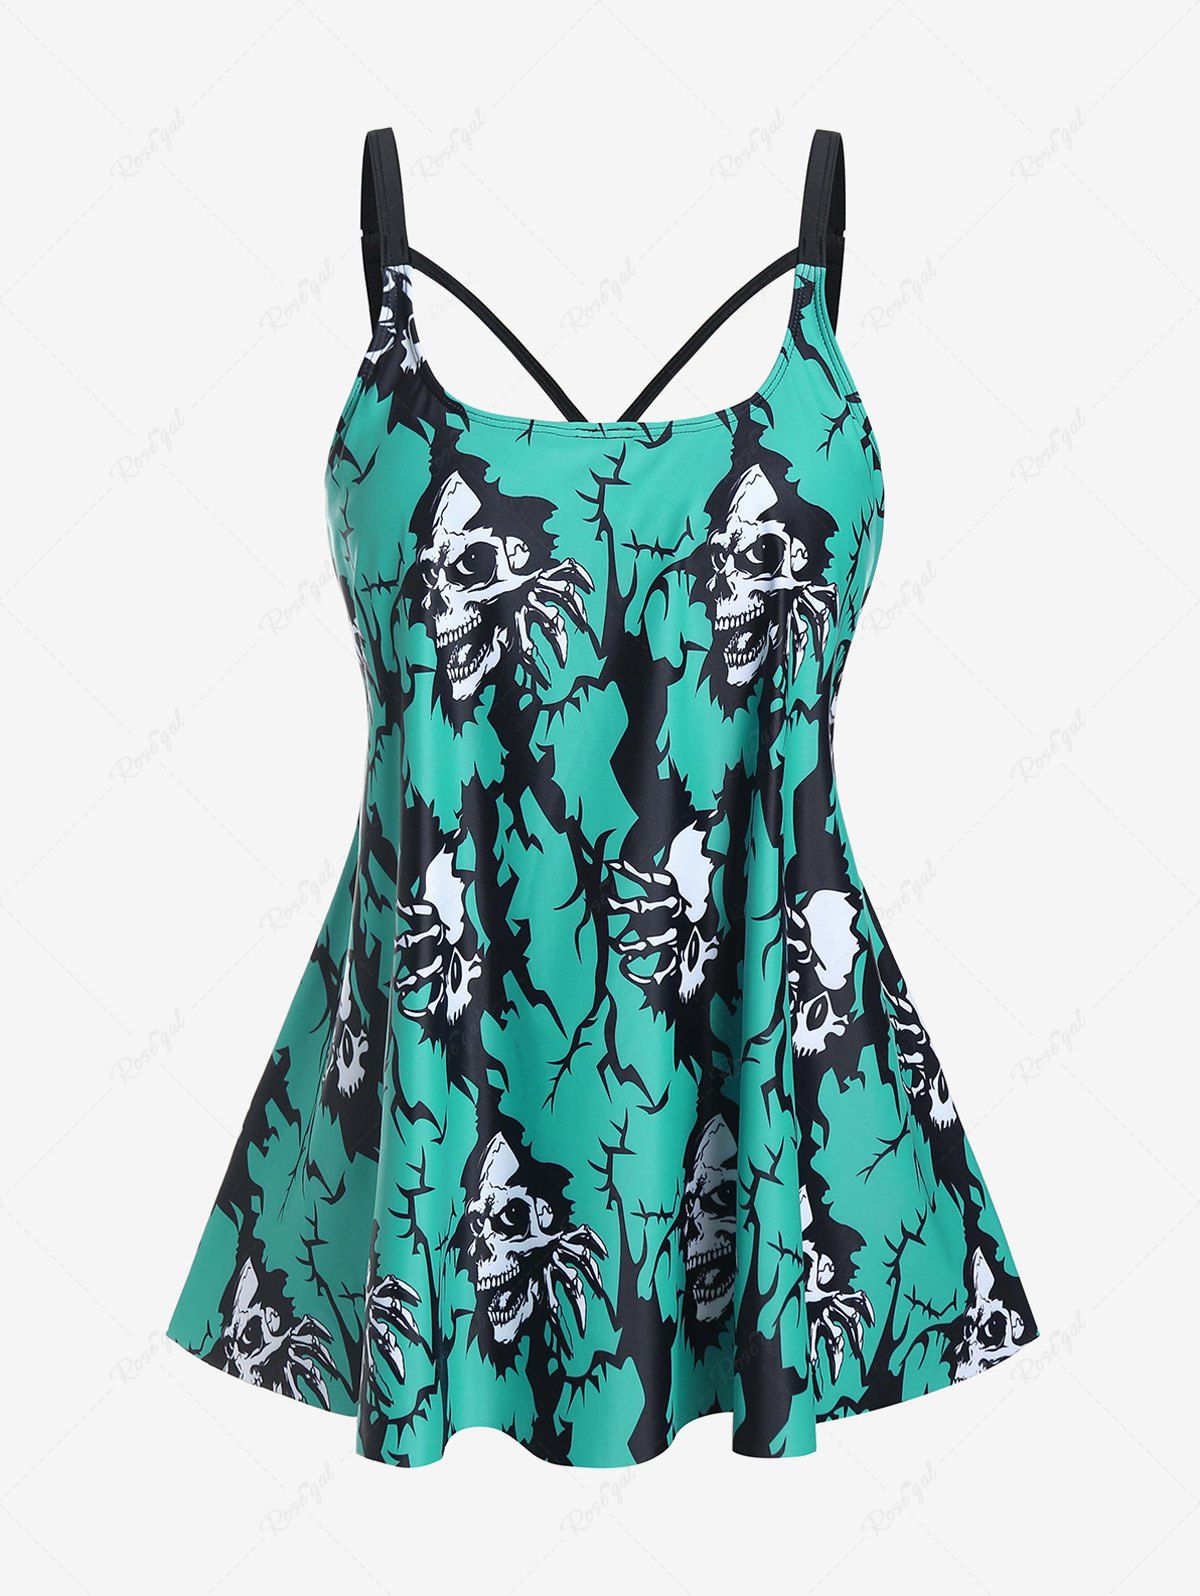 Fancy Plus Size Gothic Skulls Printed Padded Backless Tankini Top Swimsuit  